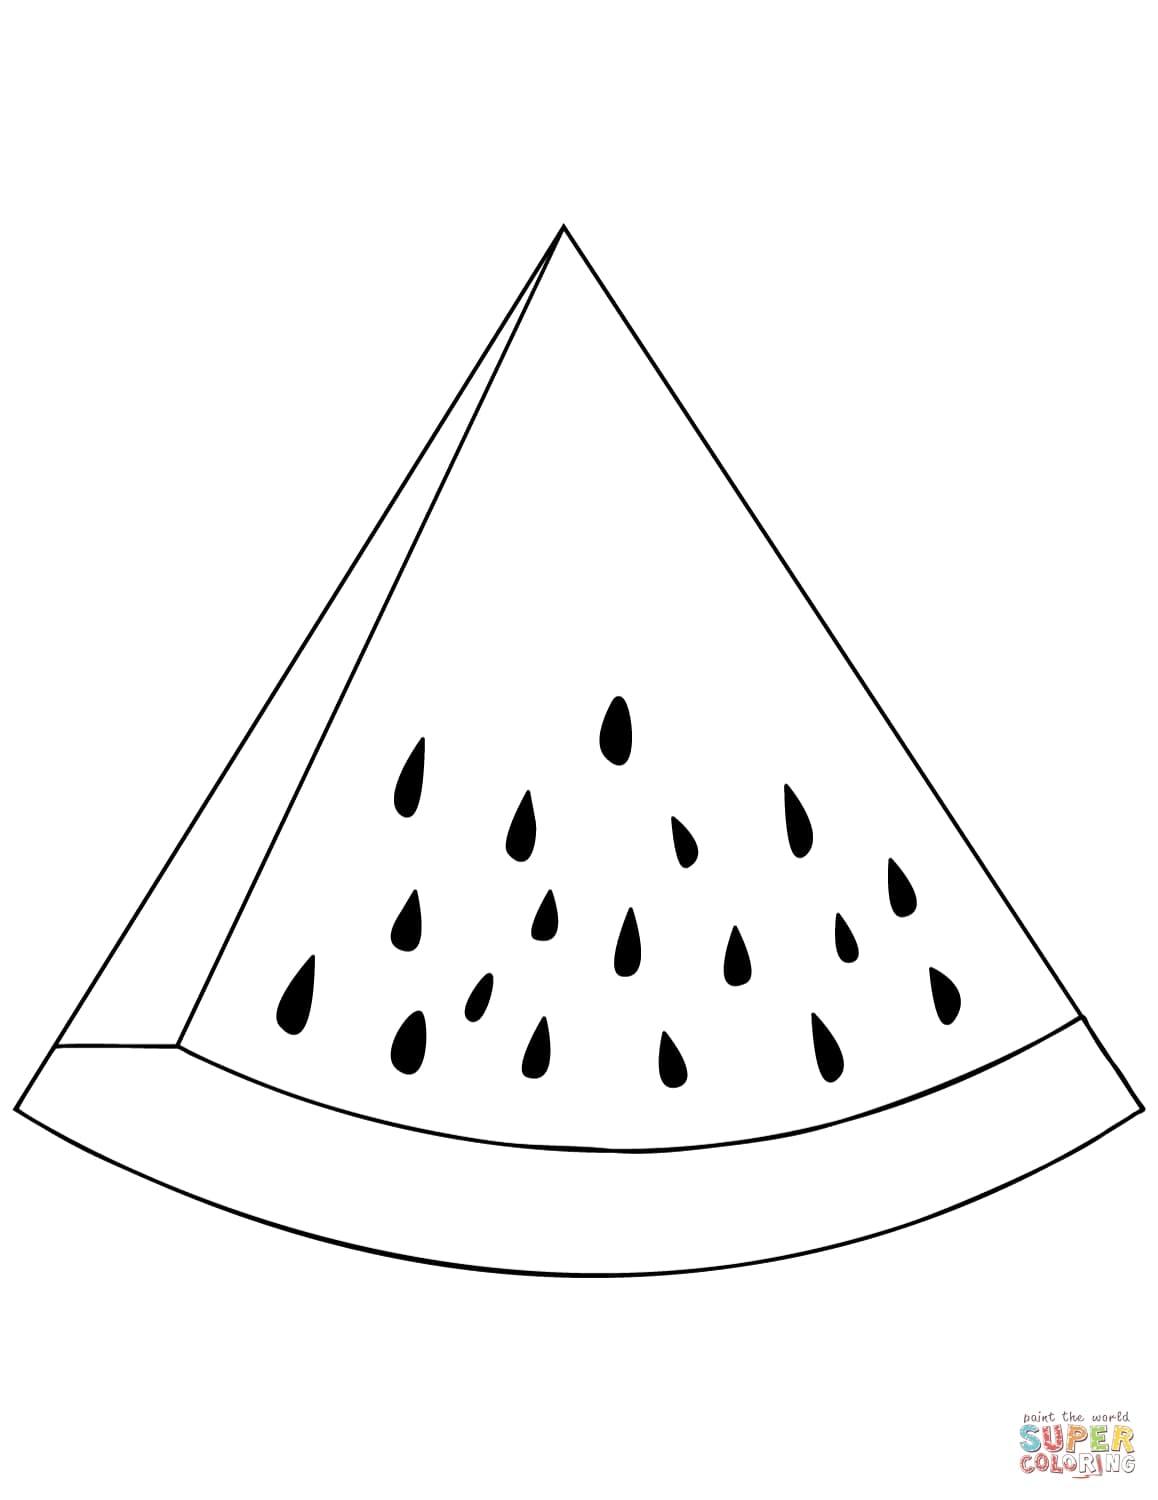 Coloring Page Of A Watermelon / Watermelon Coloring Page Planerium